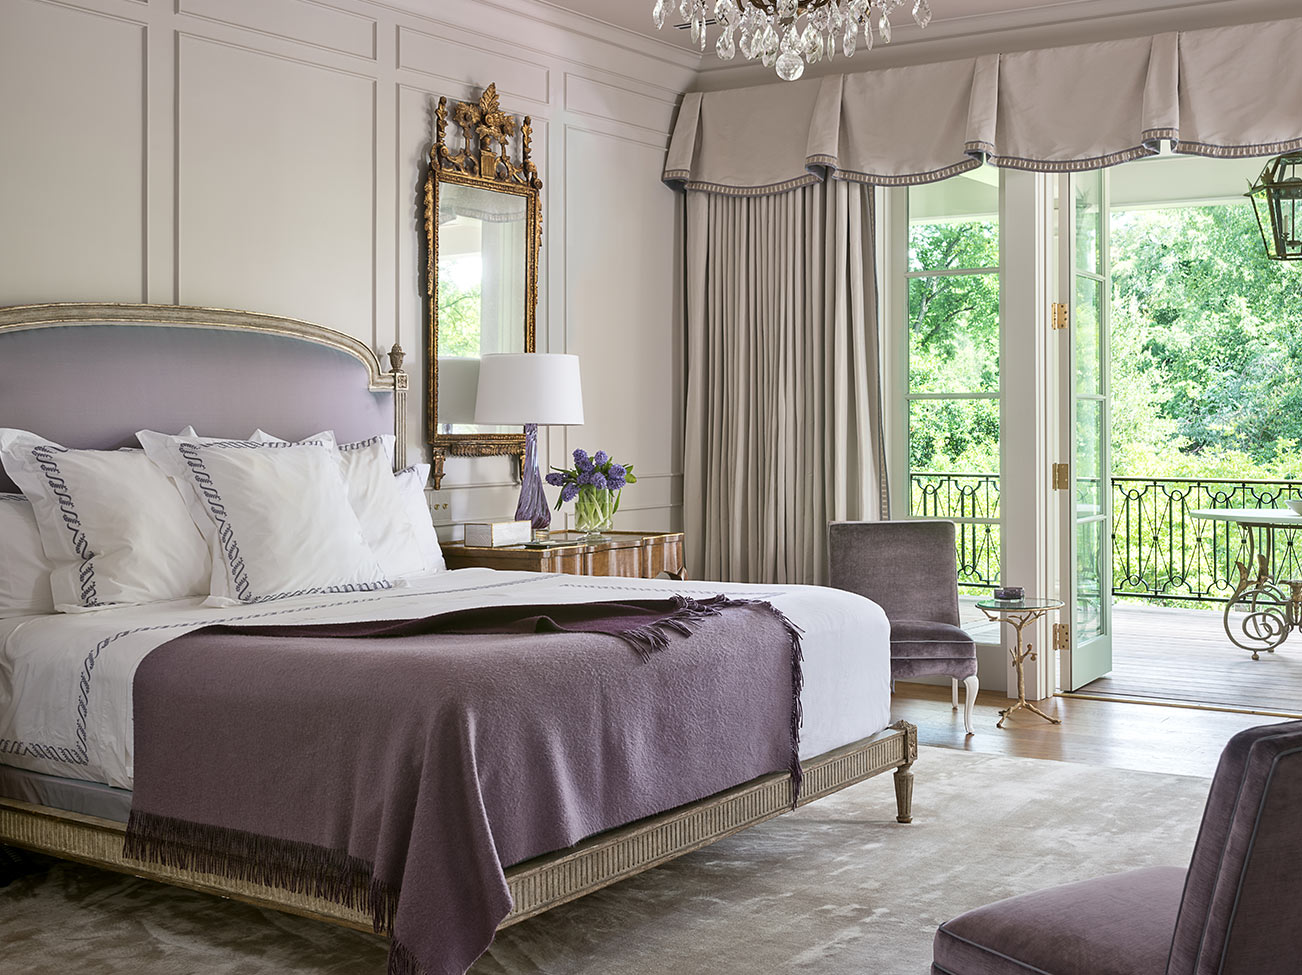 Glamourous light gray and pale lavender bedroom, paneled walls, large king bed, draped windows and door open to terrace.